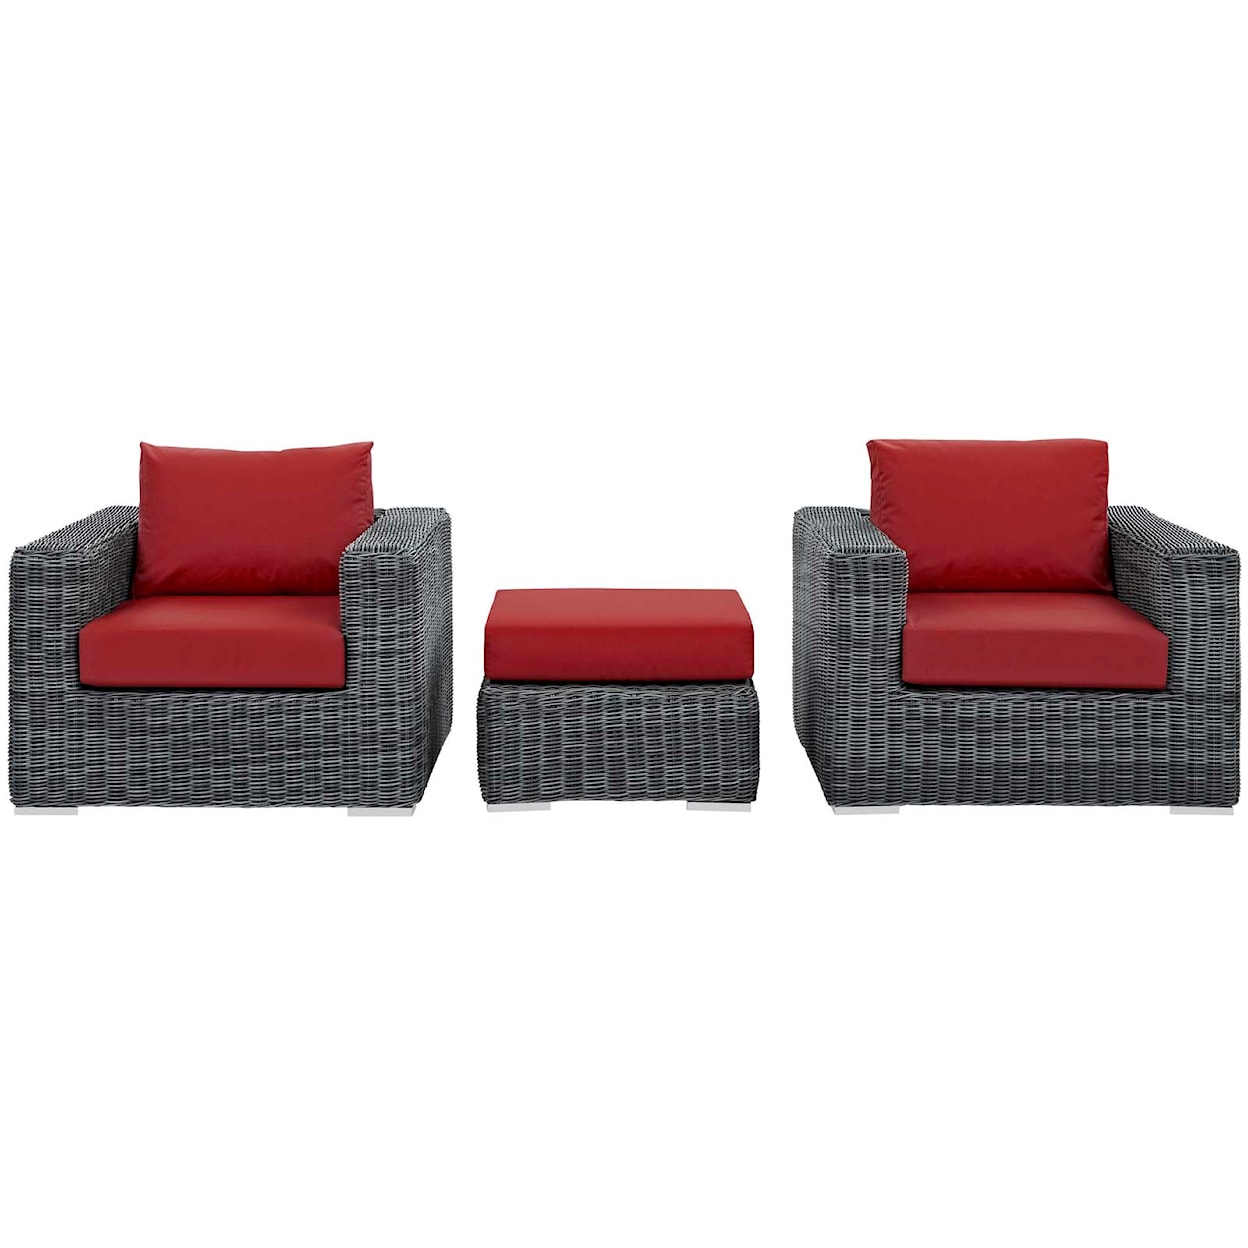 Modway Summon Outdoor 3 Piece Sectional Set